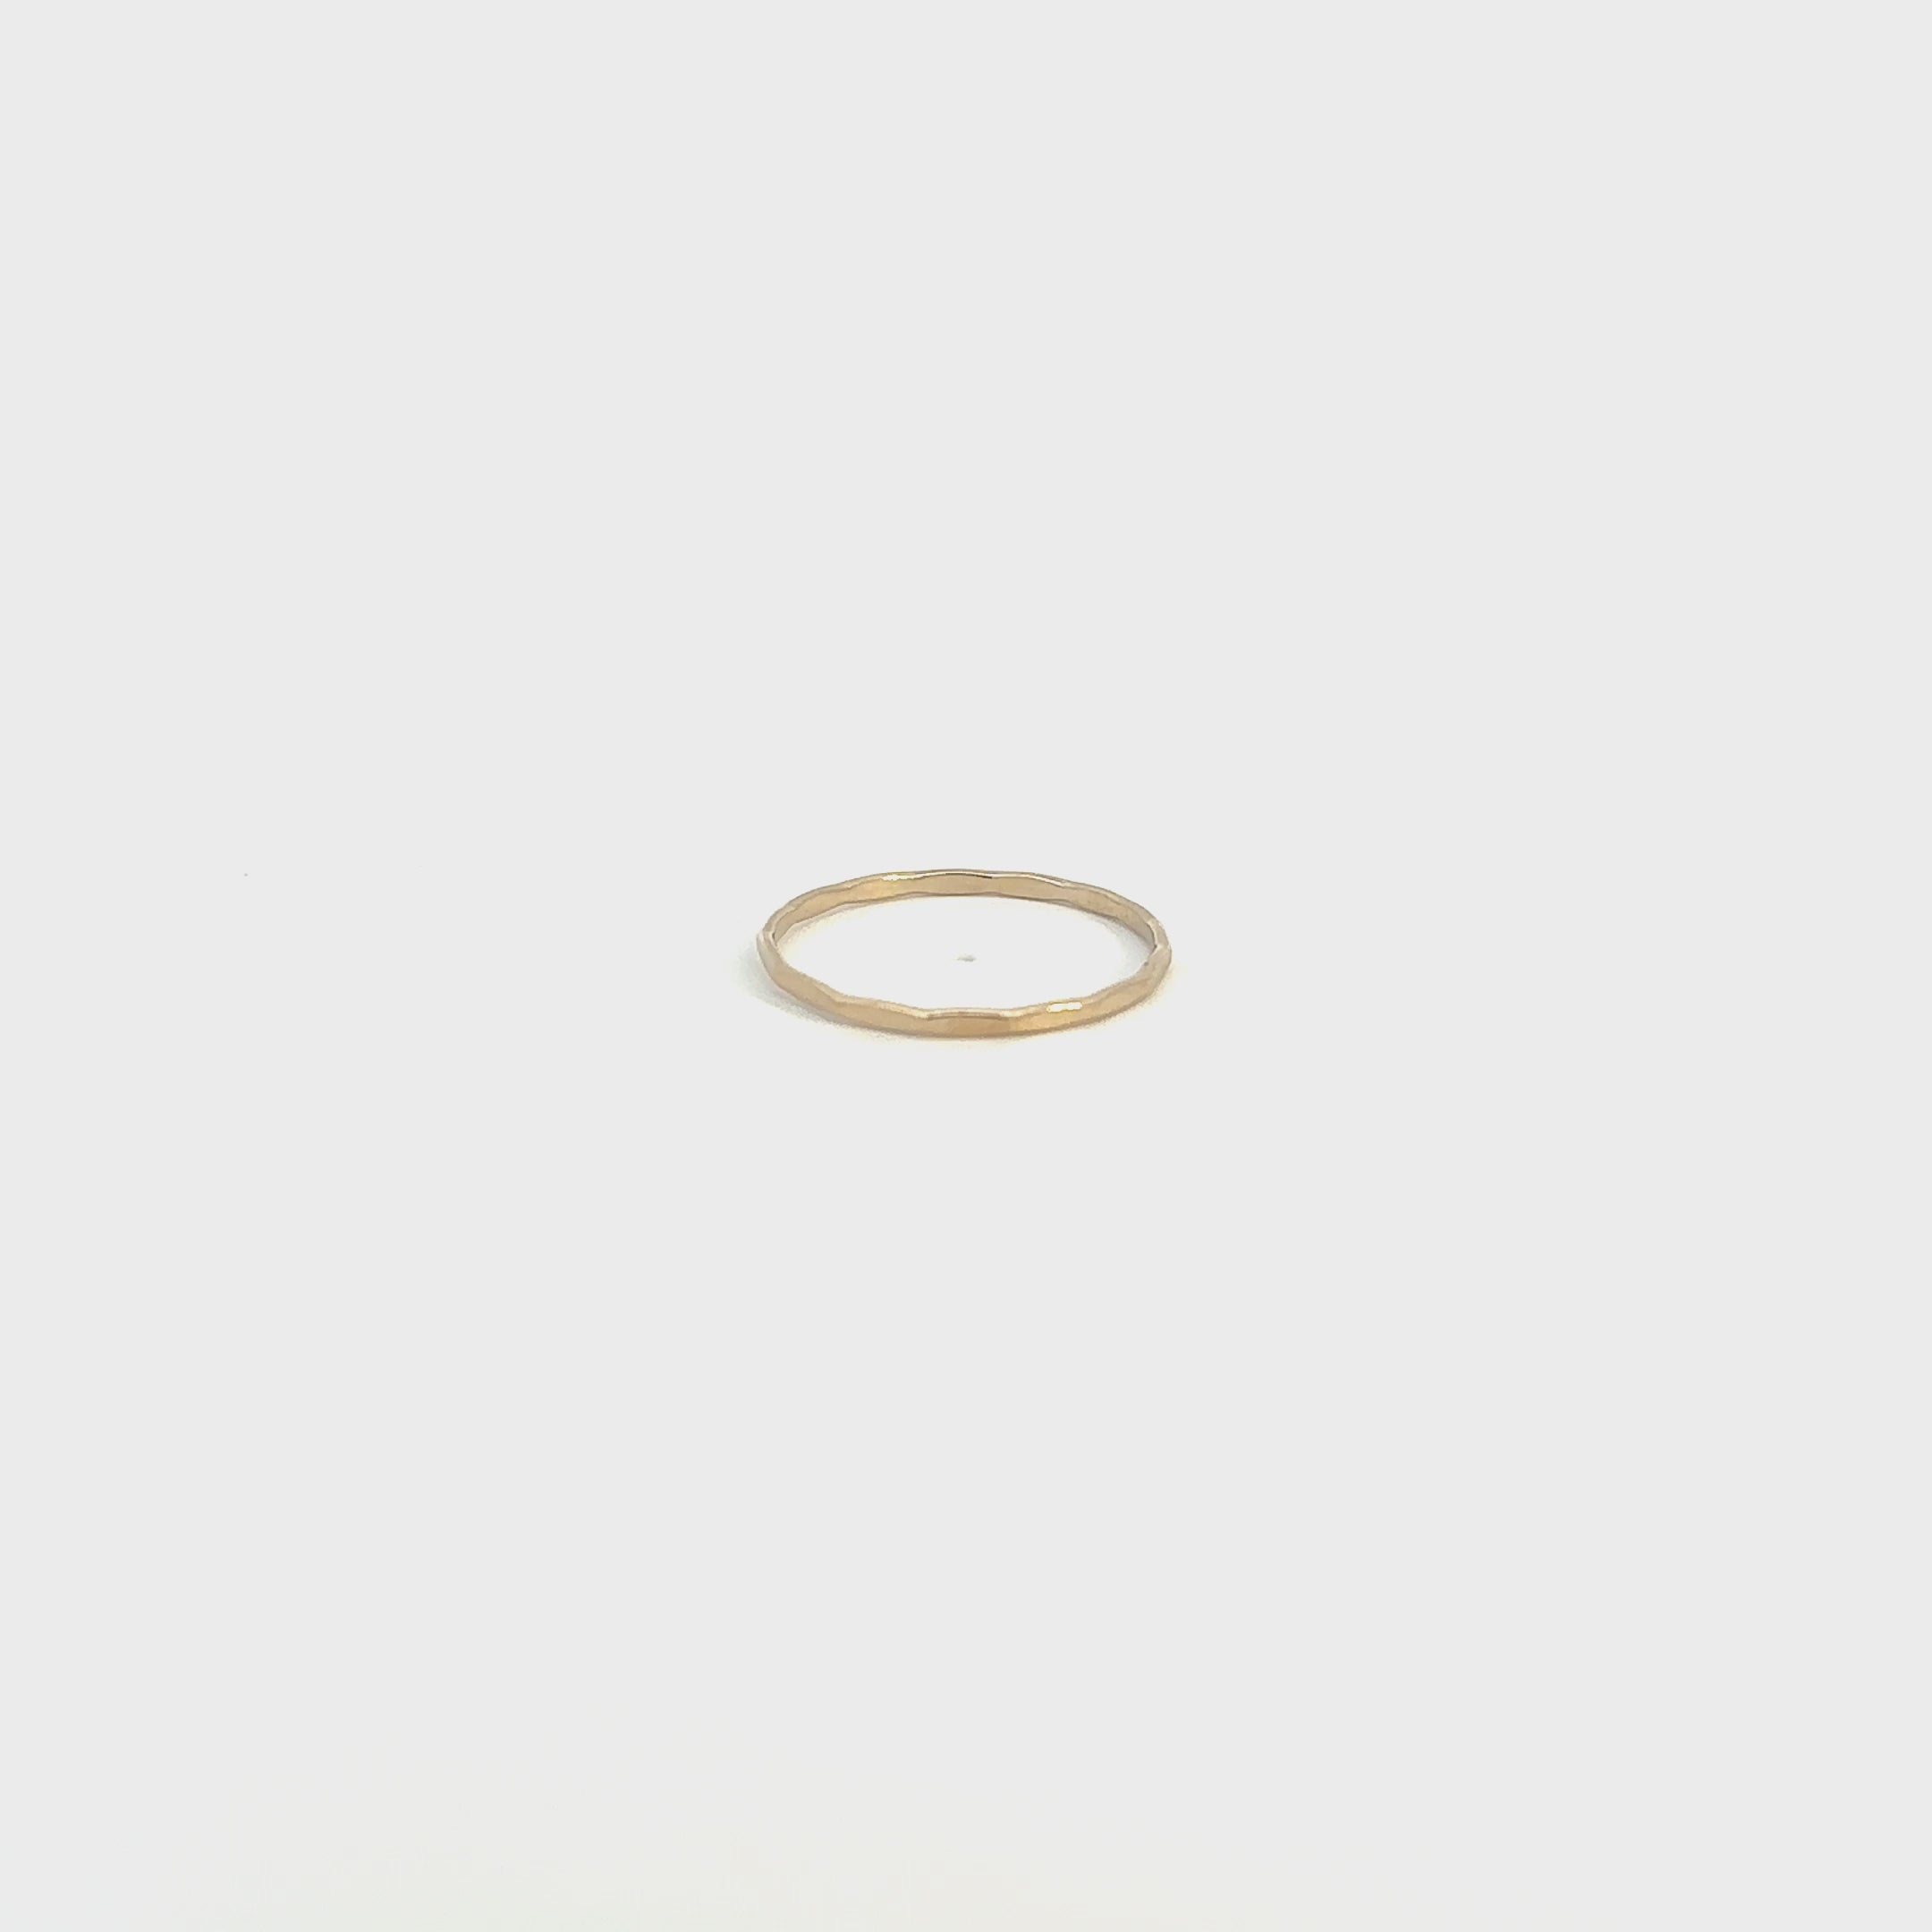 Adorn your hand with a delicate, shimmering gold stacking ring.